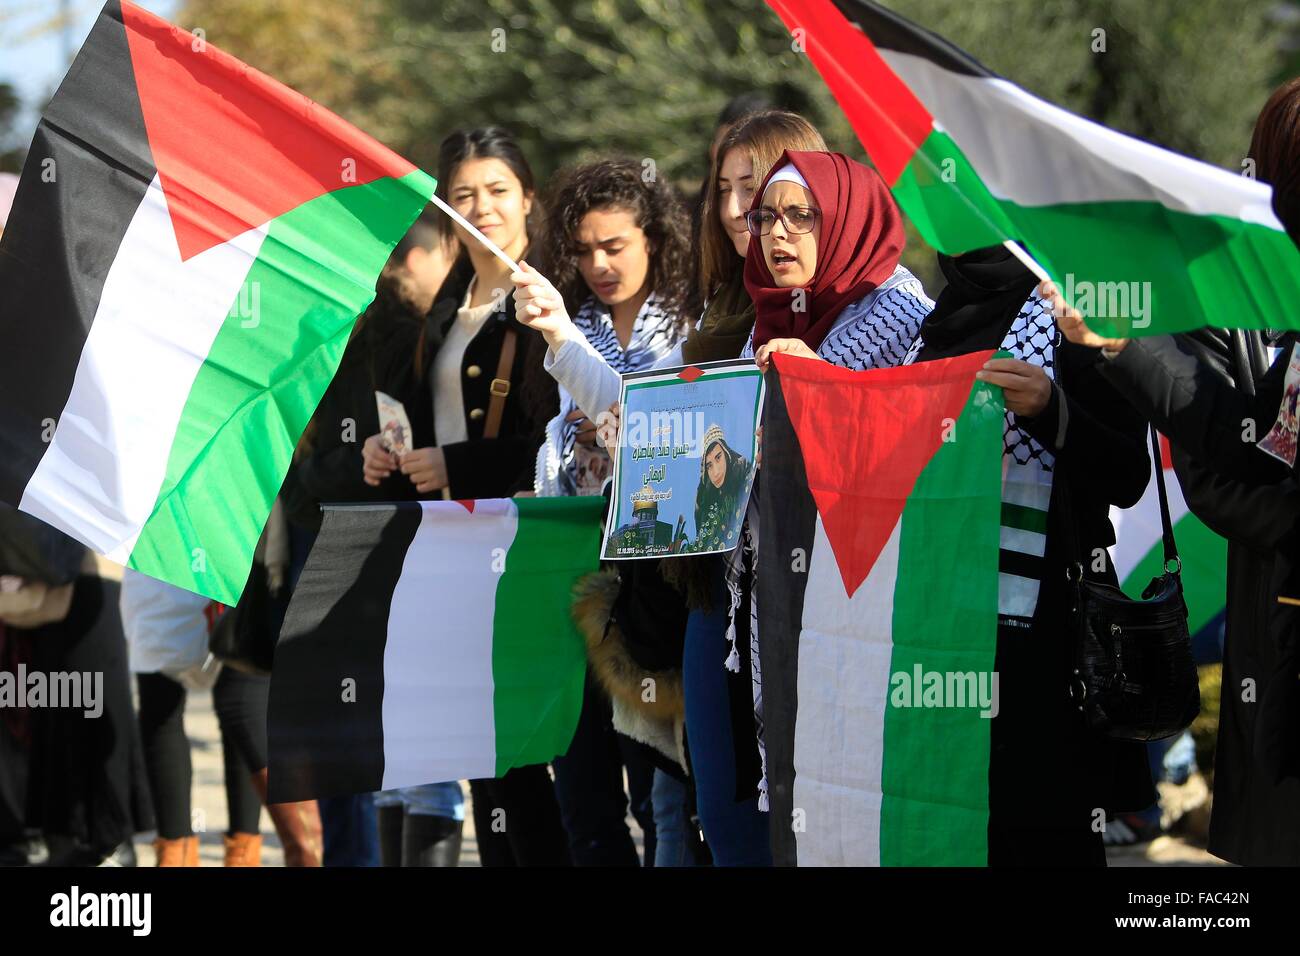 Jerusalem. 26th Dec, 2015. Palestinians take part in a protest outside Jerusalem's Old City on Dec. 26, 2015. Palestinians protested on Saturday, demanding the return of the bodies who have been killed during the latest wave of violence with Israel. © Muammar Awad/Xinhua/Alamy Live News Stock Photo